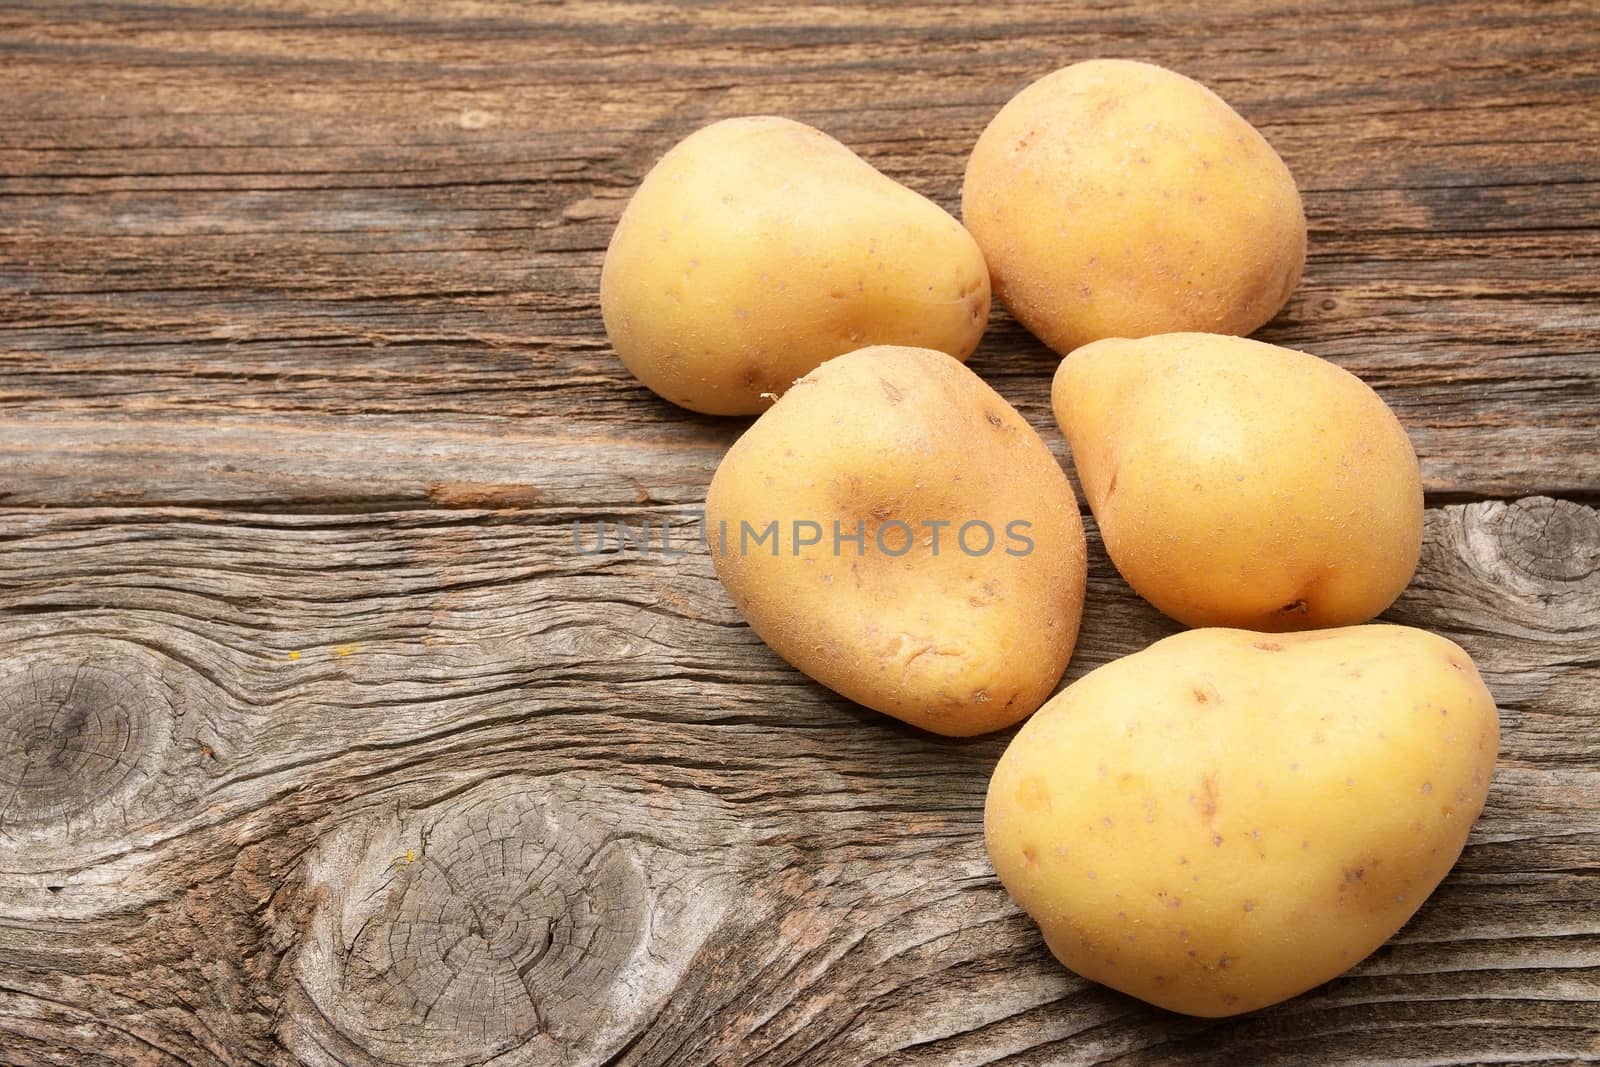 Raw potatoes by comet